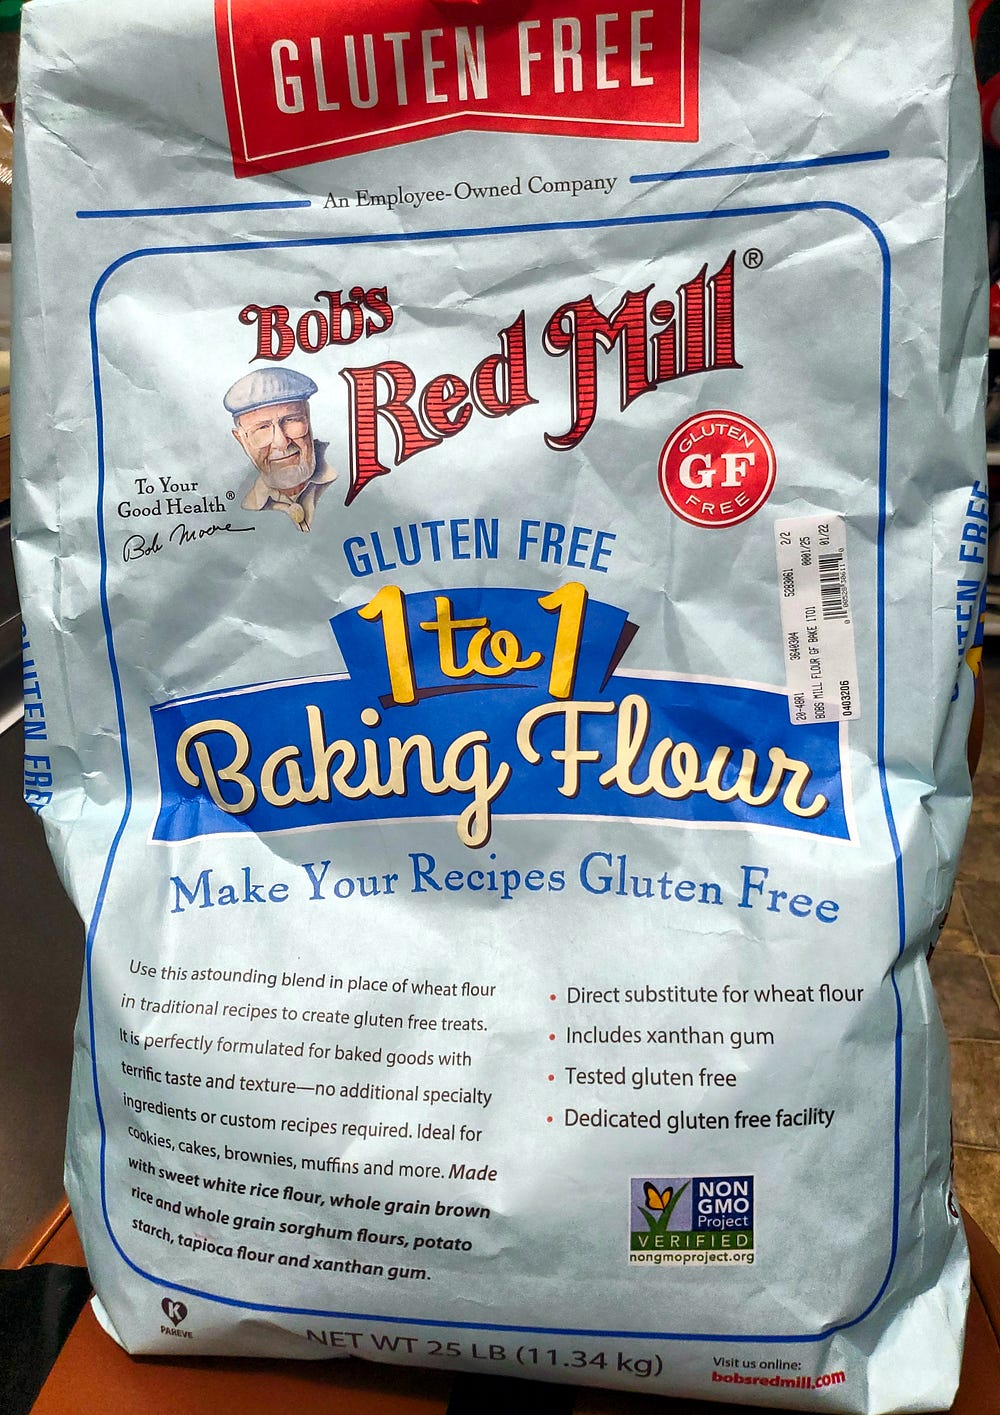 Twenty five pound bag of Bob’s Red Mill gluten-free one to one baking flour in a light blue bag.